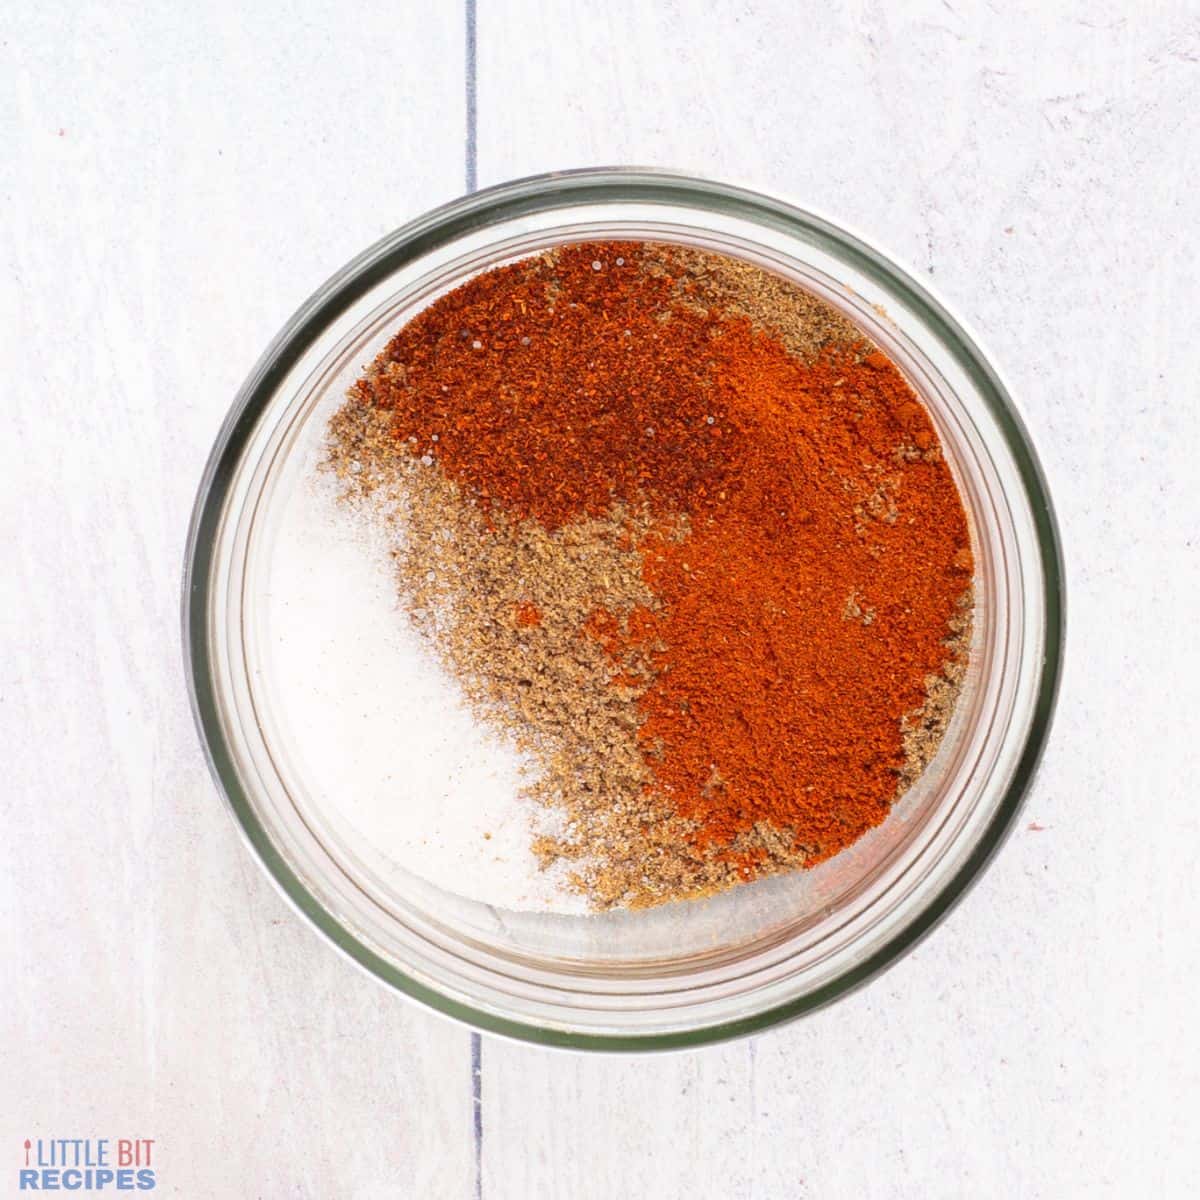 dry spice mix in small bowl.